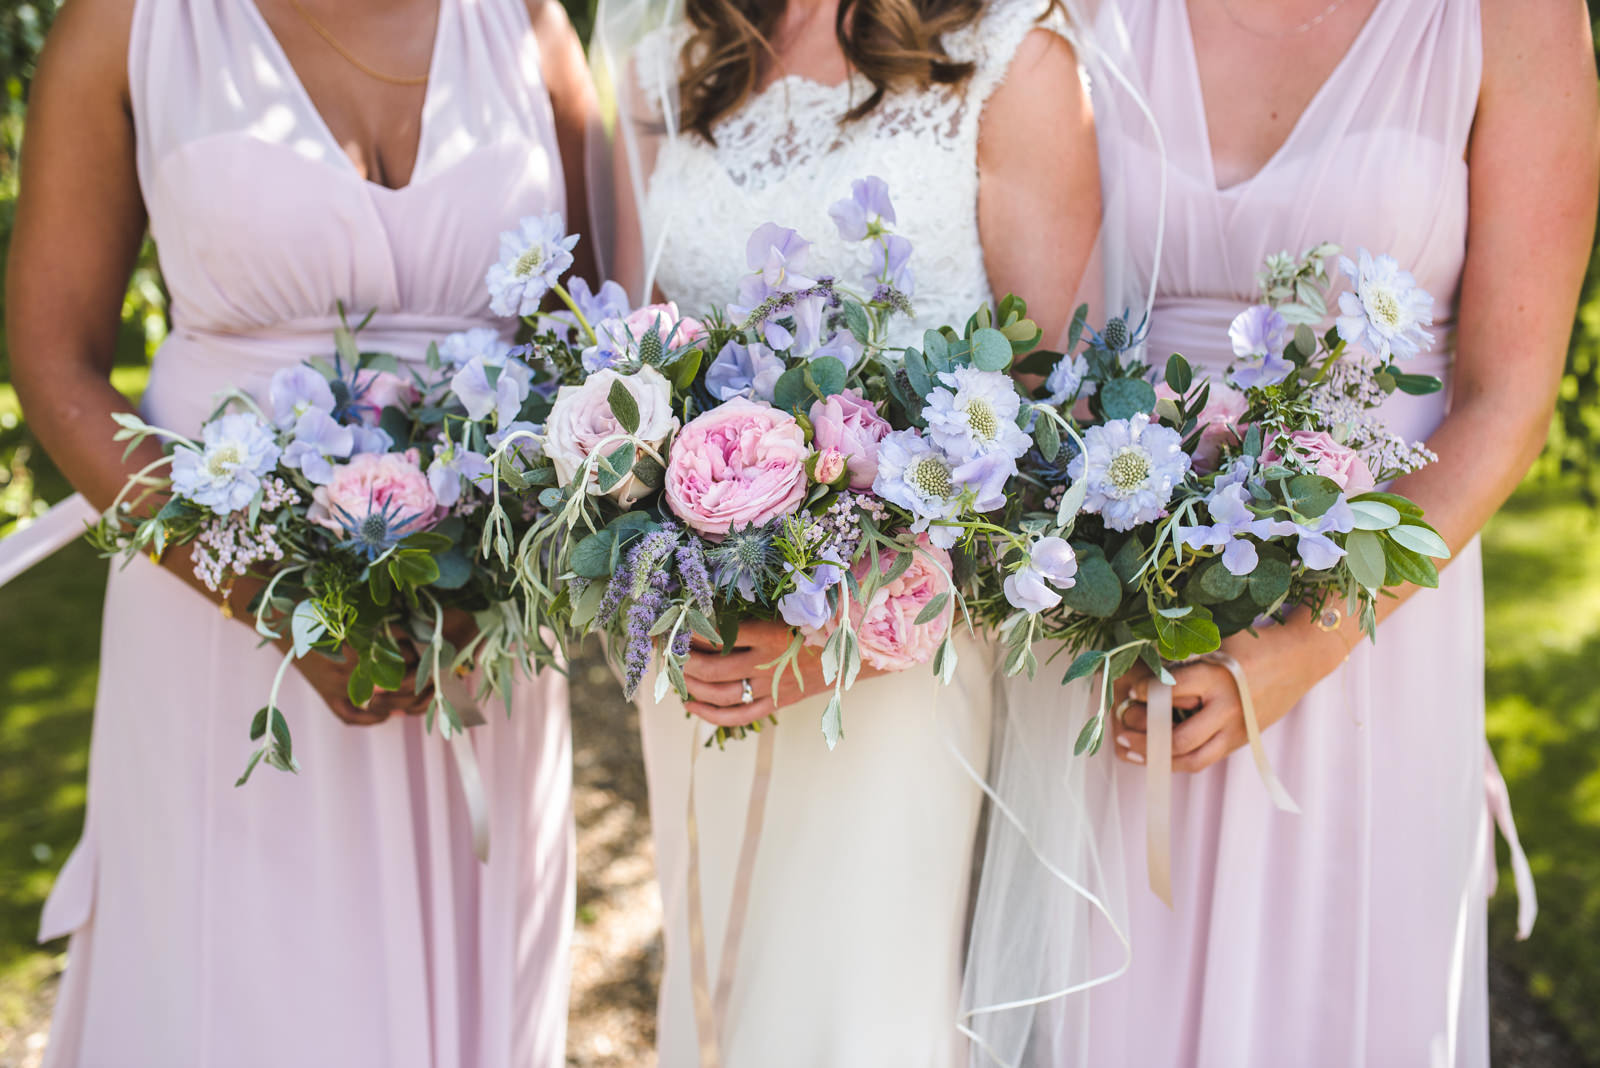 Herbert and Isles stunning pink and purple summer bridal bouquet.